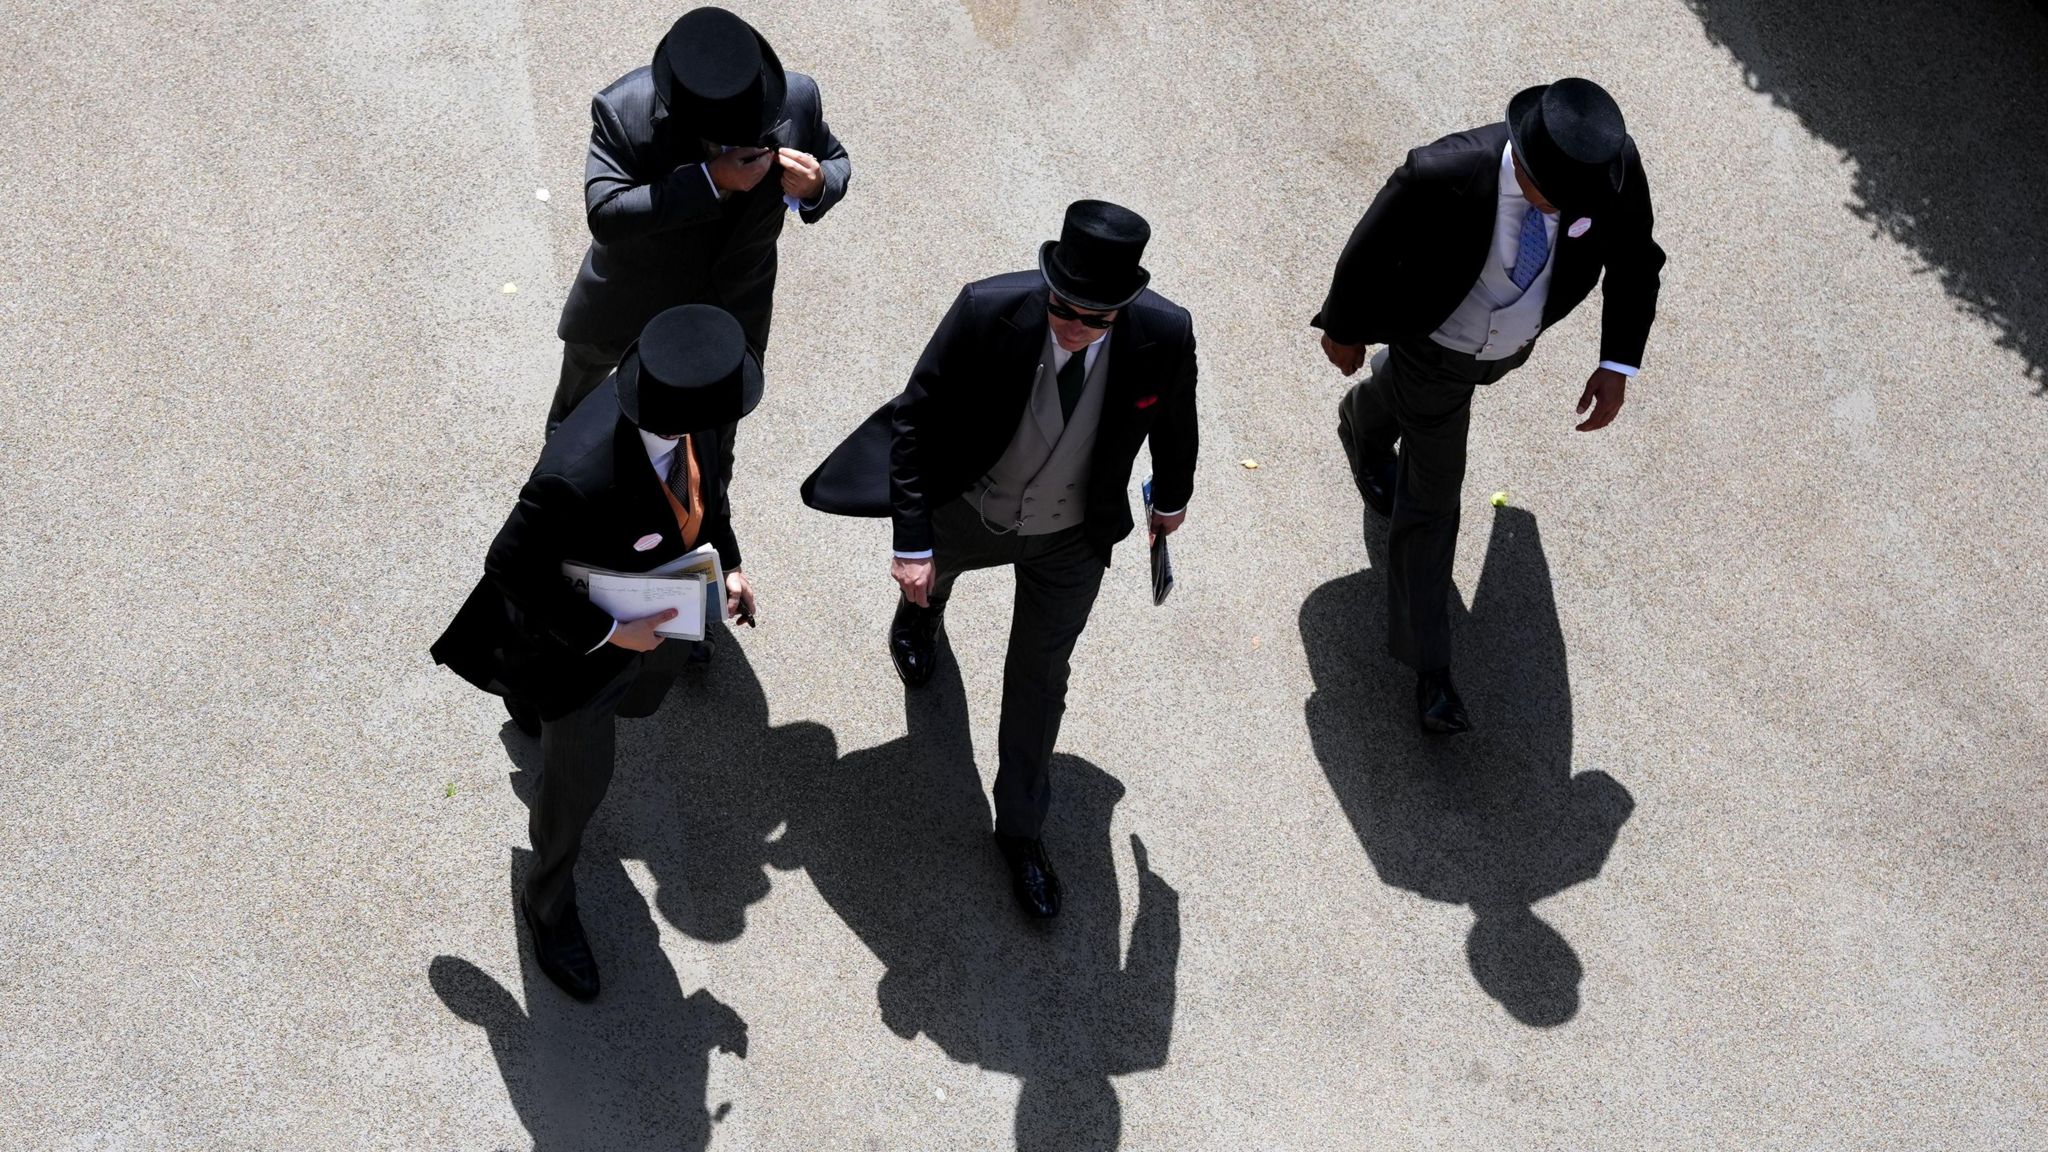 Aerial view of group of four men wearing top hats and tailcoats